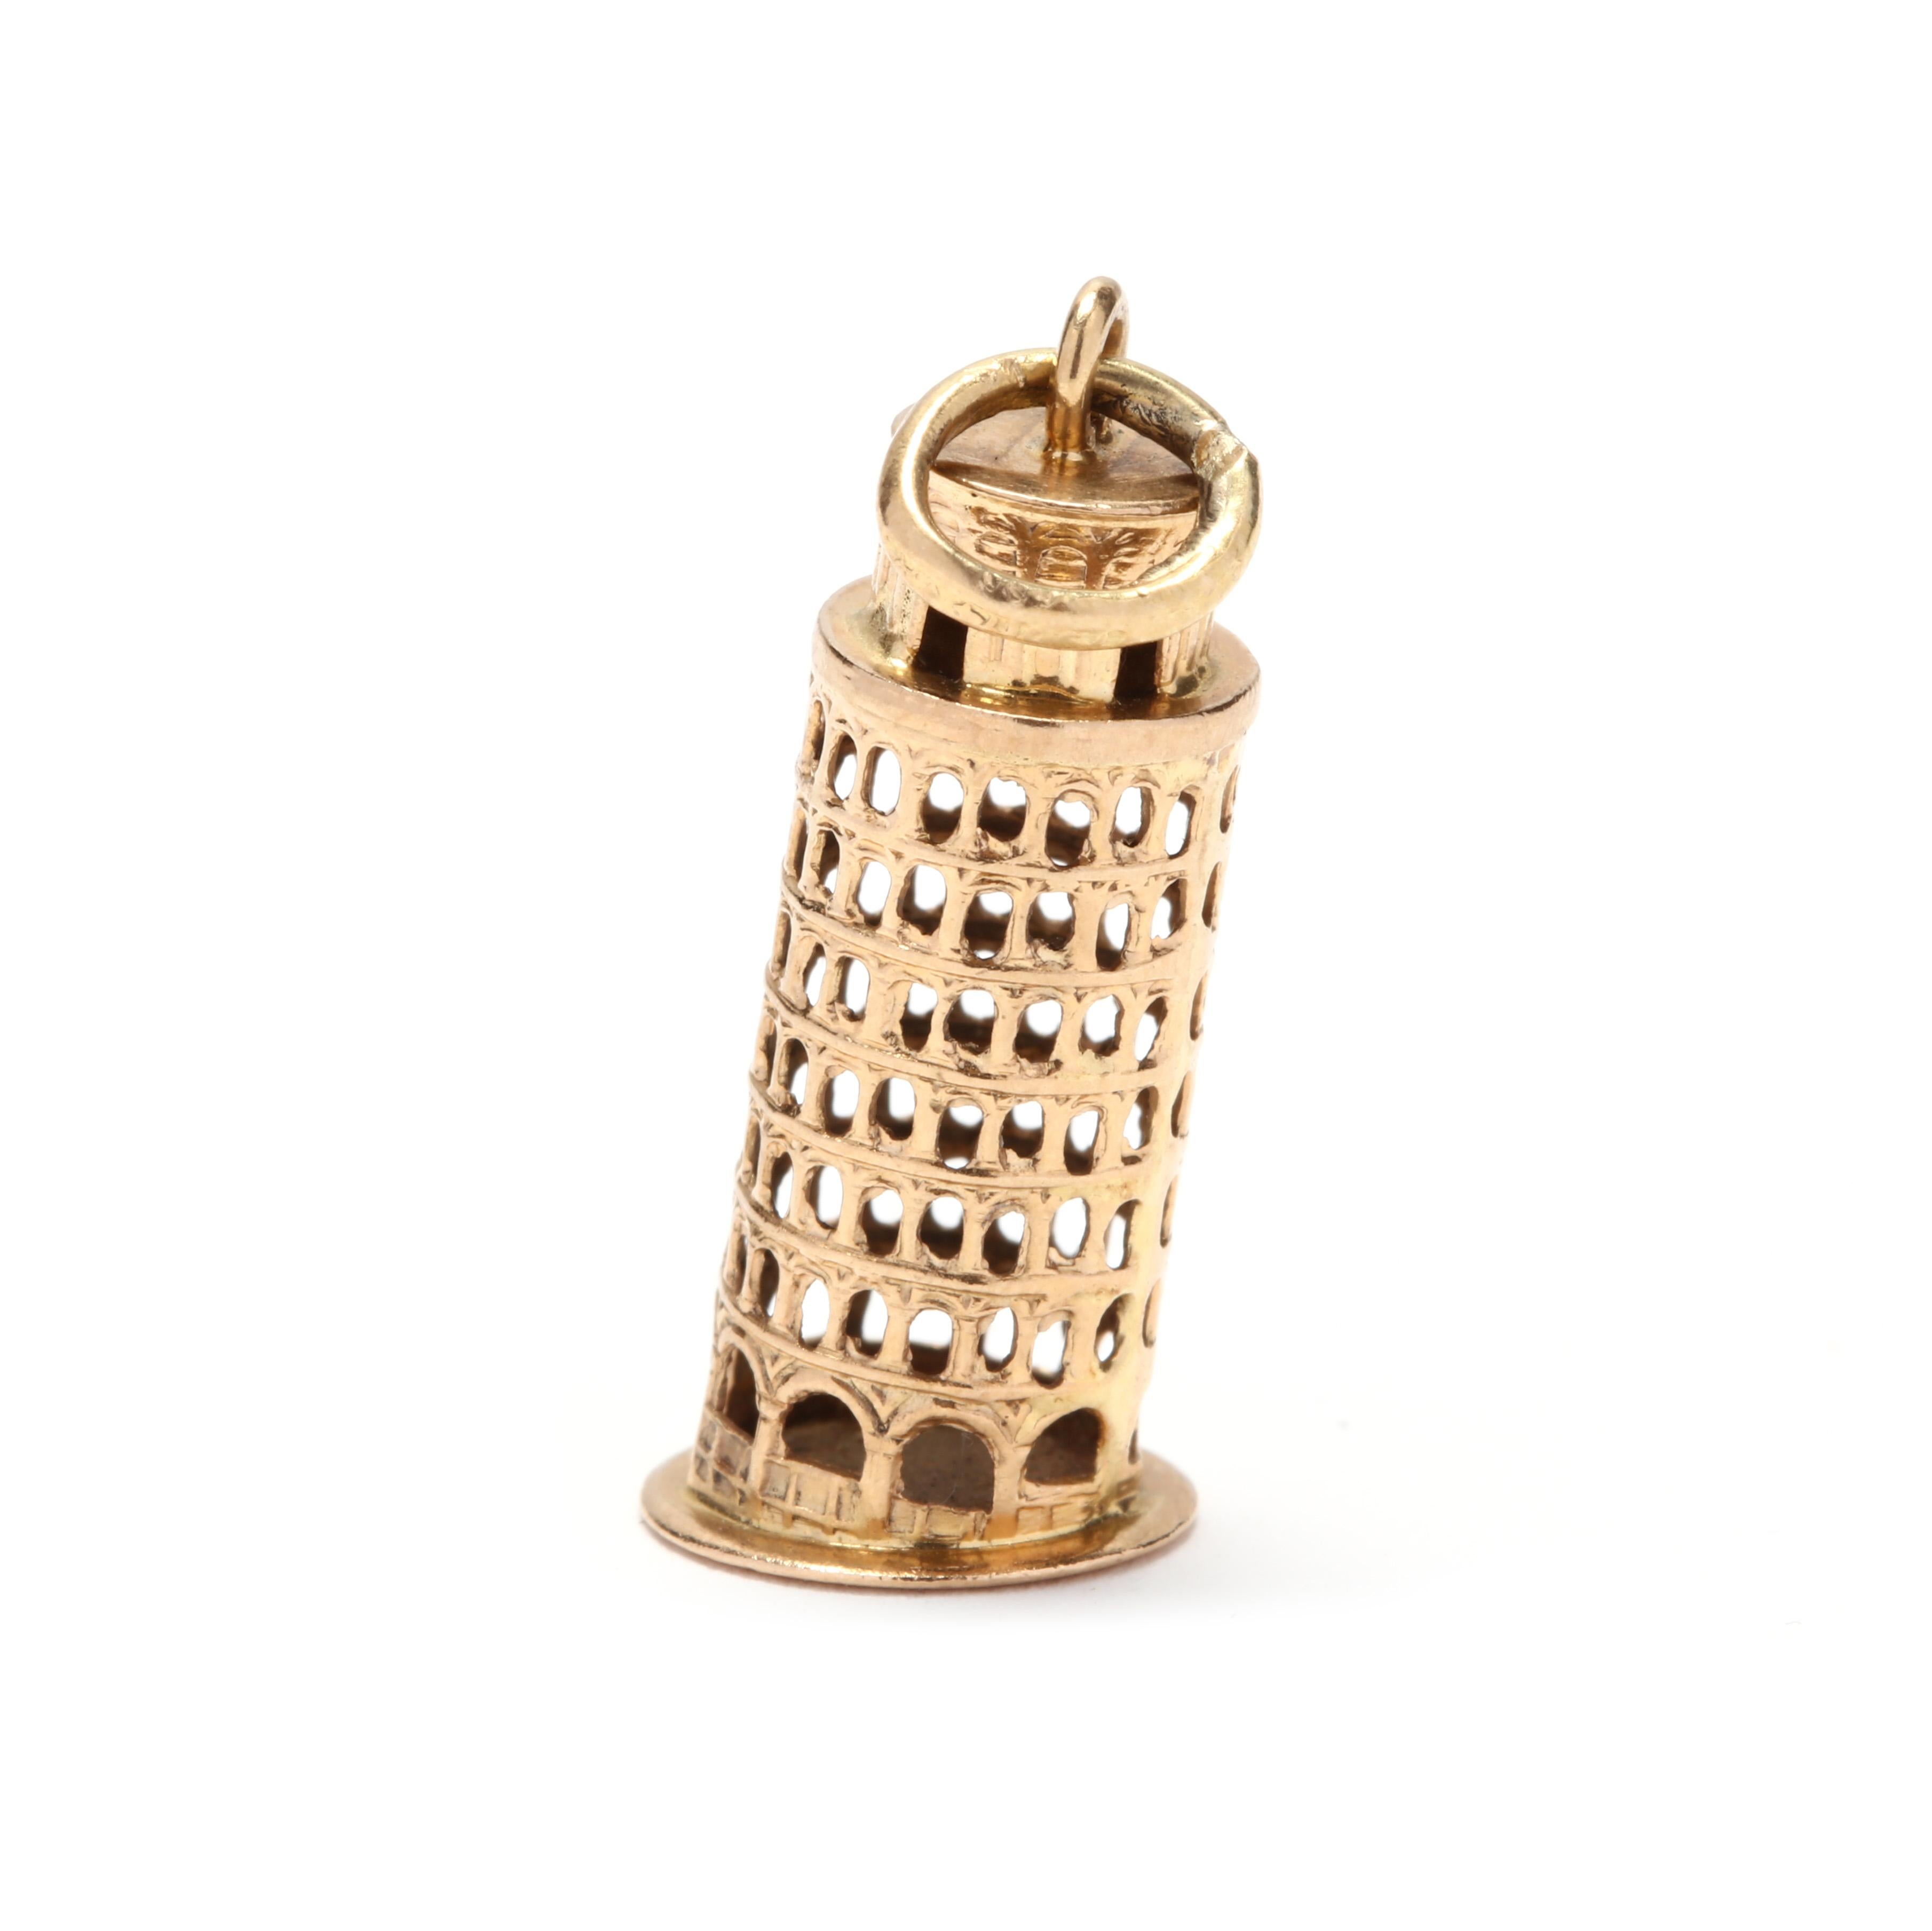 A vintage 18 karat yellow gold leaning tower of Pisa charm / pendant. This pendant features the leaning tower of Pisa motif with cutout windows and doors and with engraved detailing.

Length: 1.25 in.

2.19 dwts.

* Please note that this is a